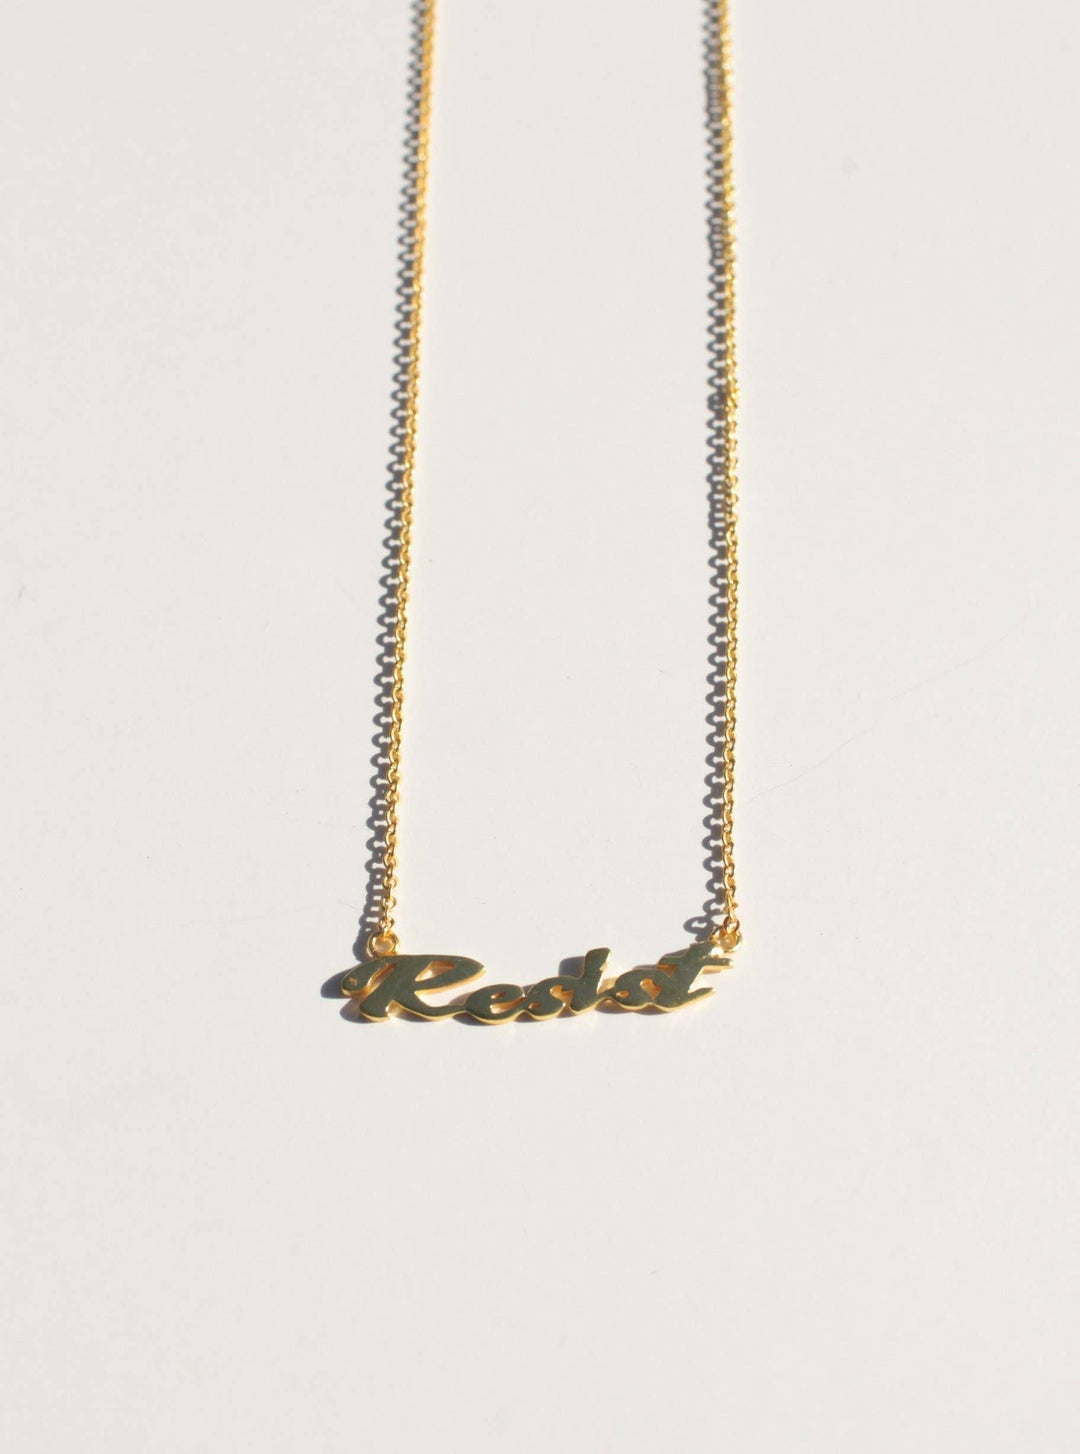 Resist Necklace - Ethical Trade Co